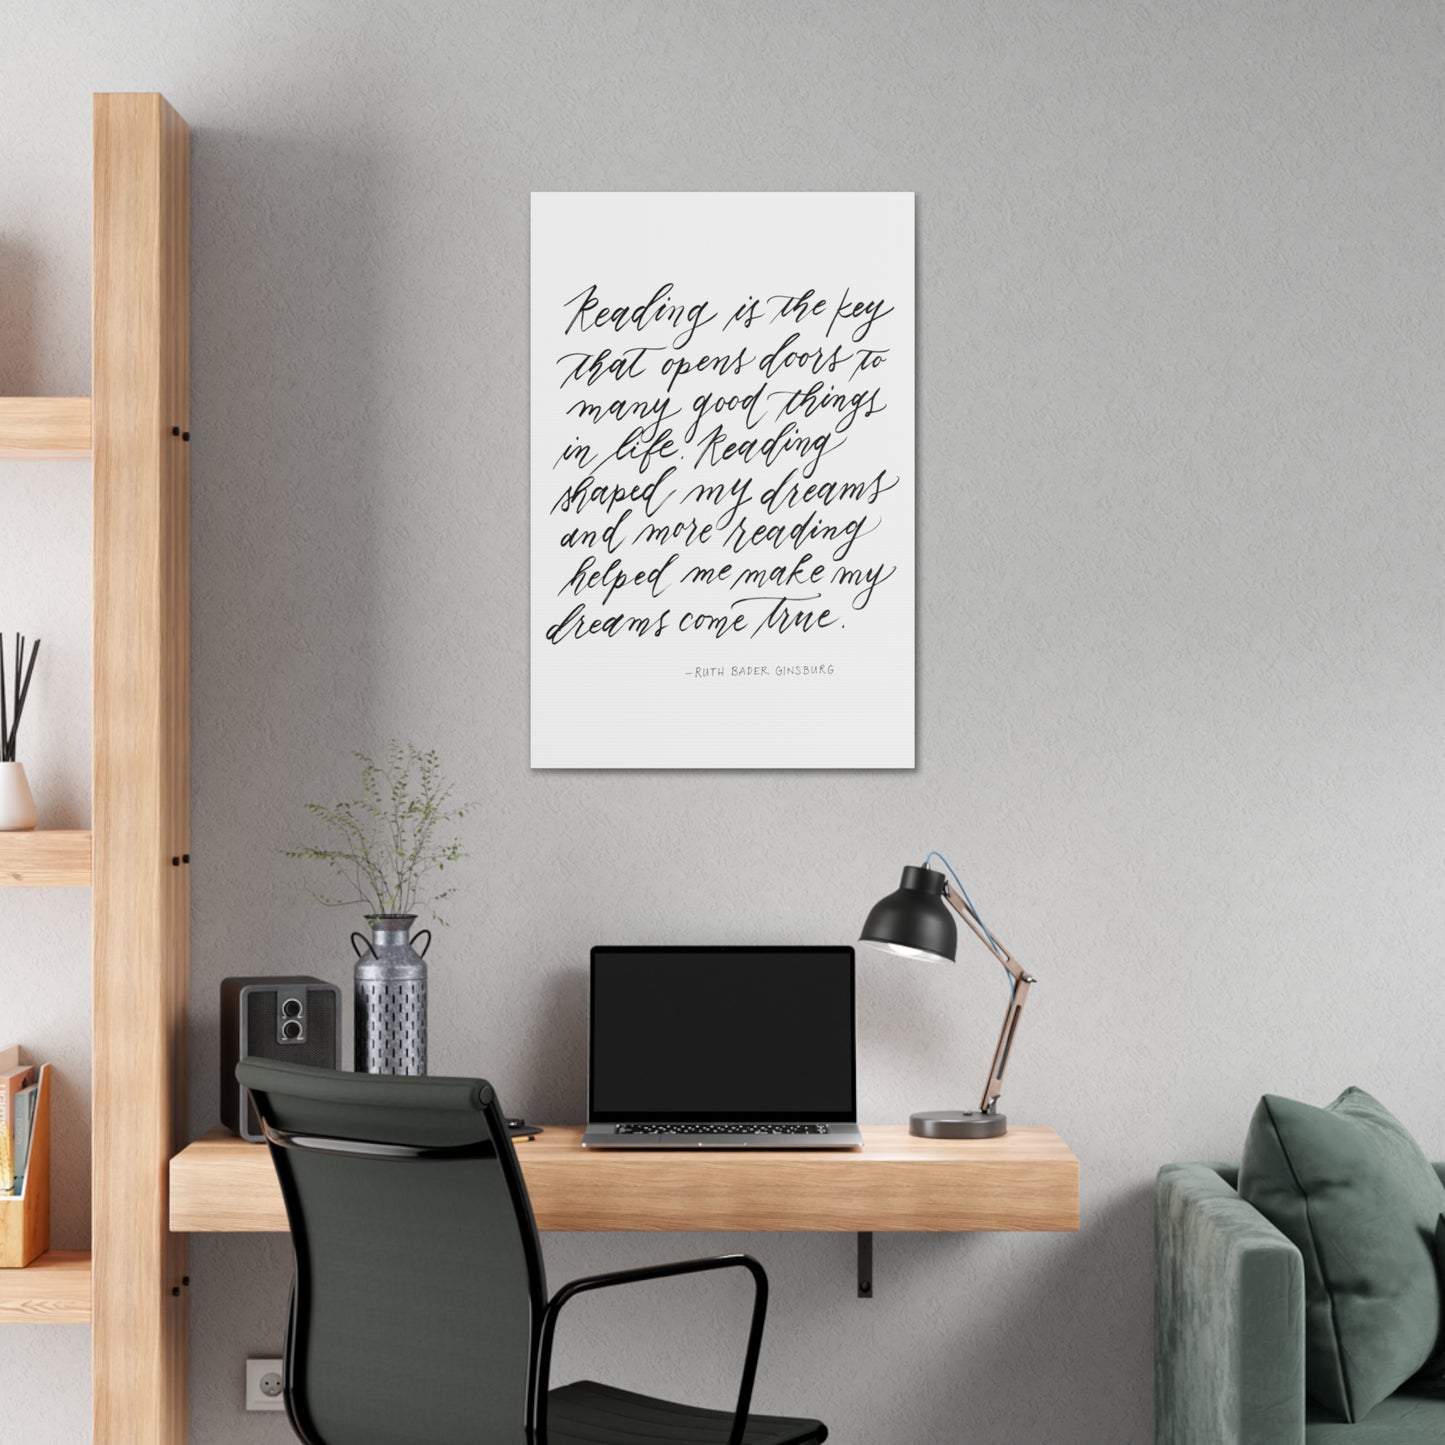 Wall Decor Canvas - "Reading is Key" Ruth Bader Ginsburg RBG Quote Calligraphy Printed on Stretched Canvas Wall Decor